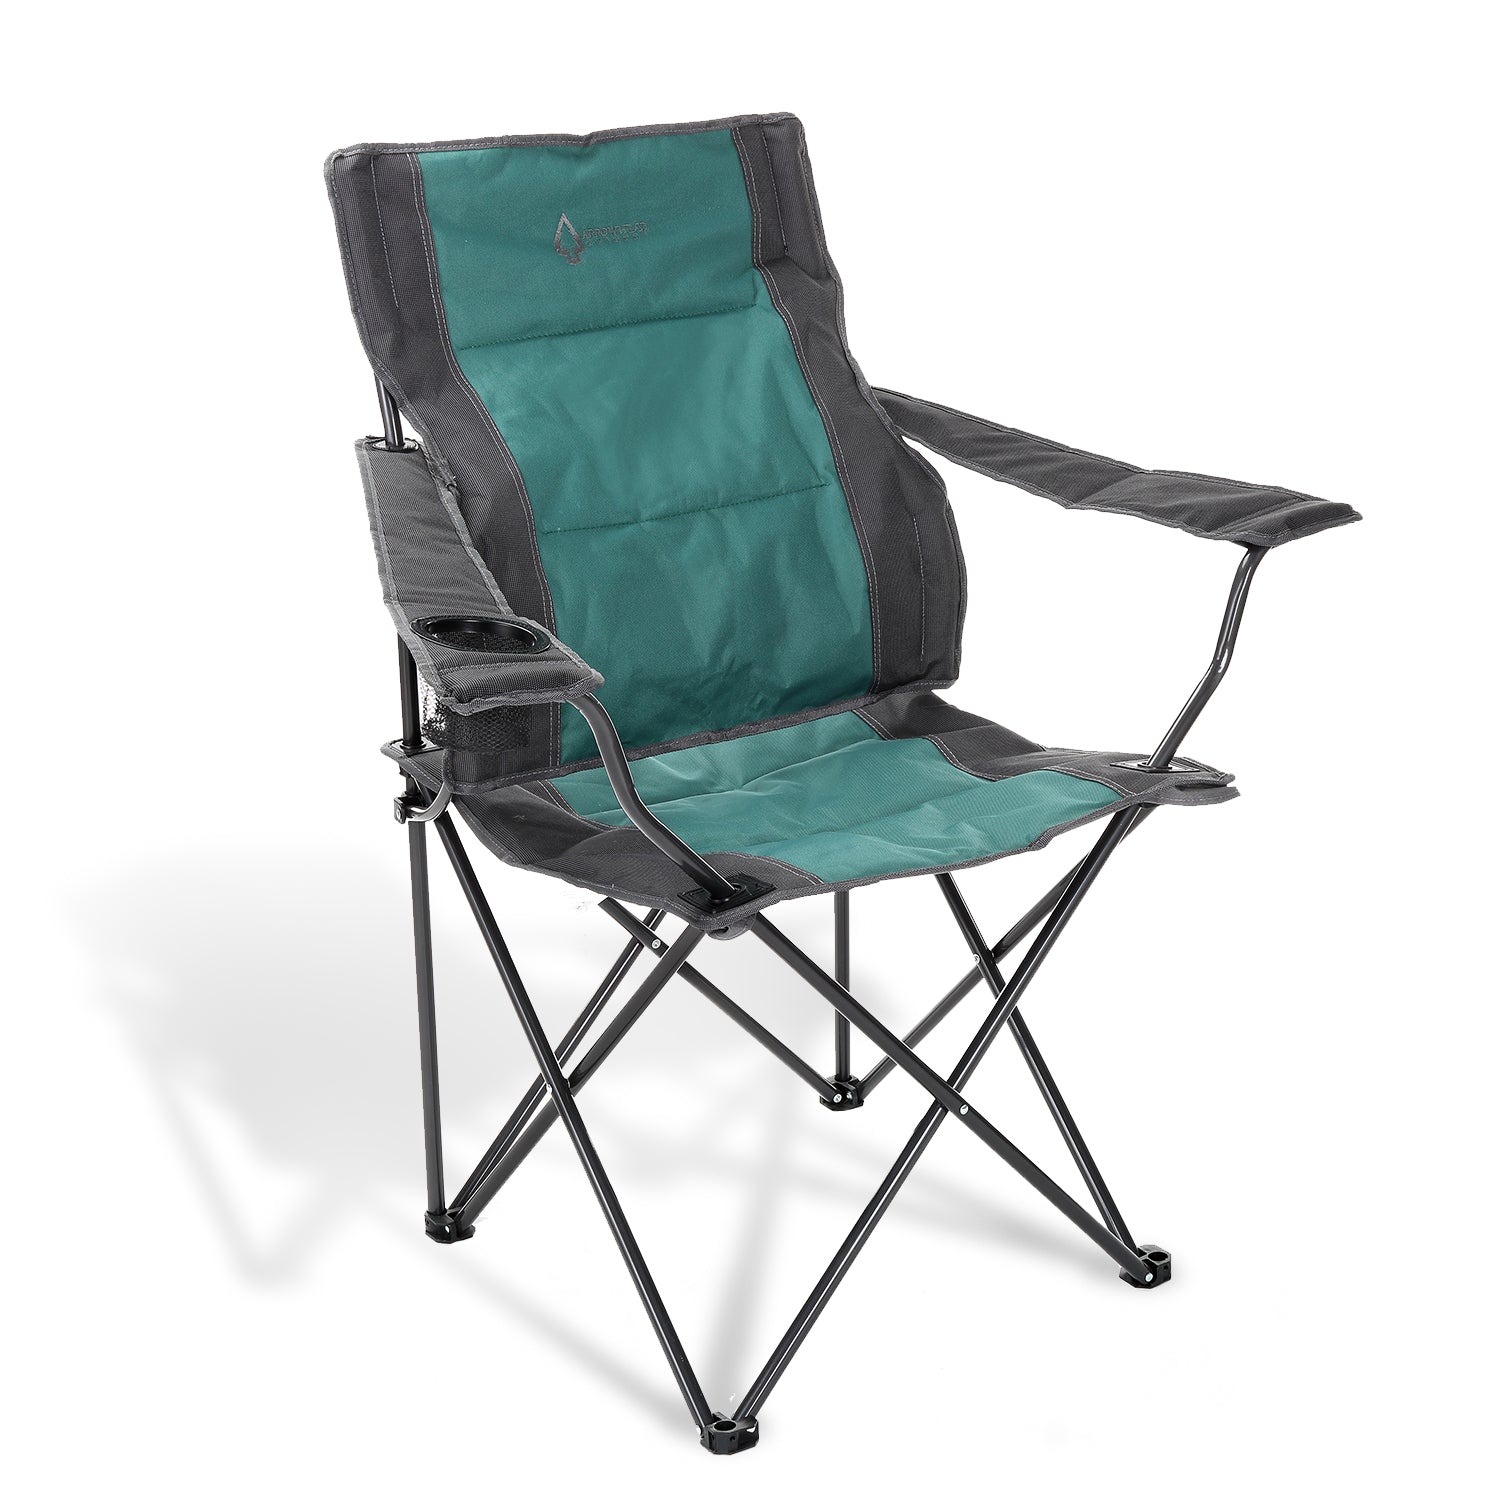 Portable Folding Camping Quad Chair w/Lumbar Back Support